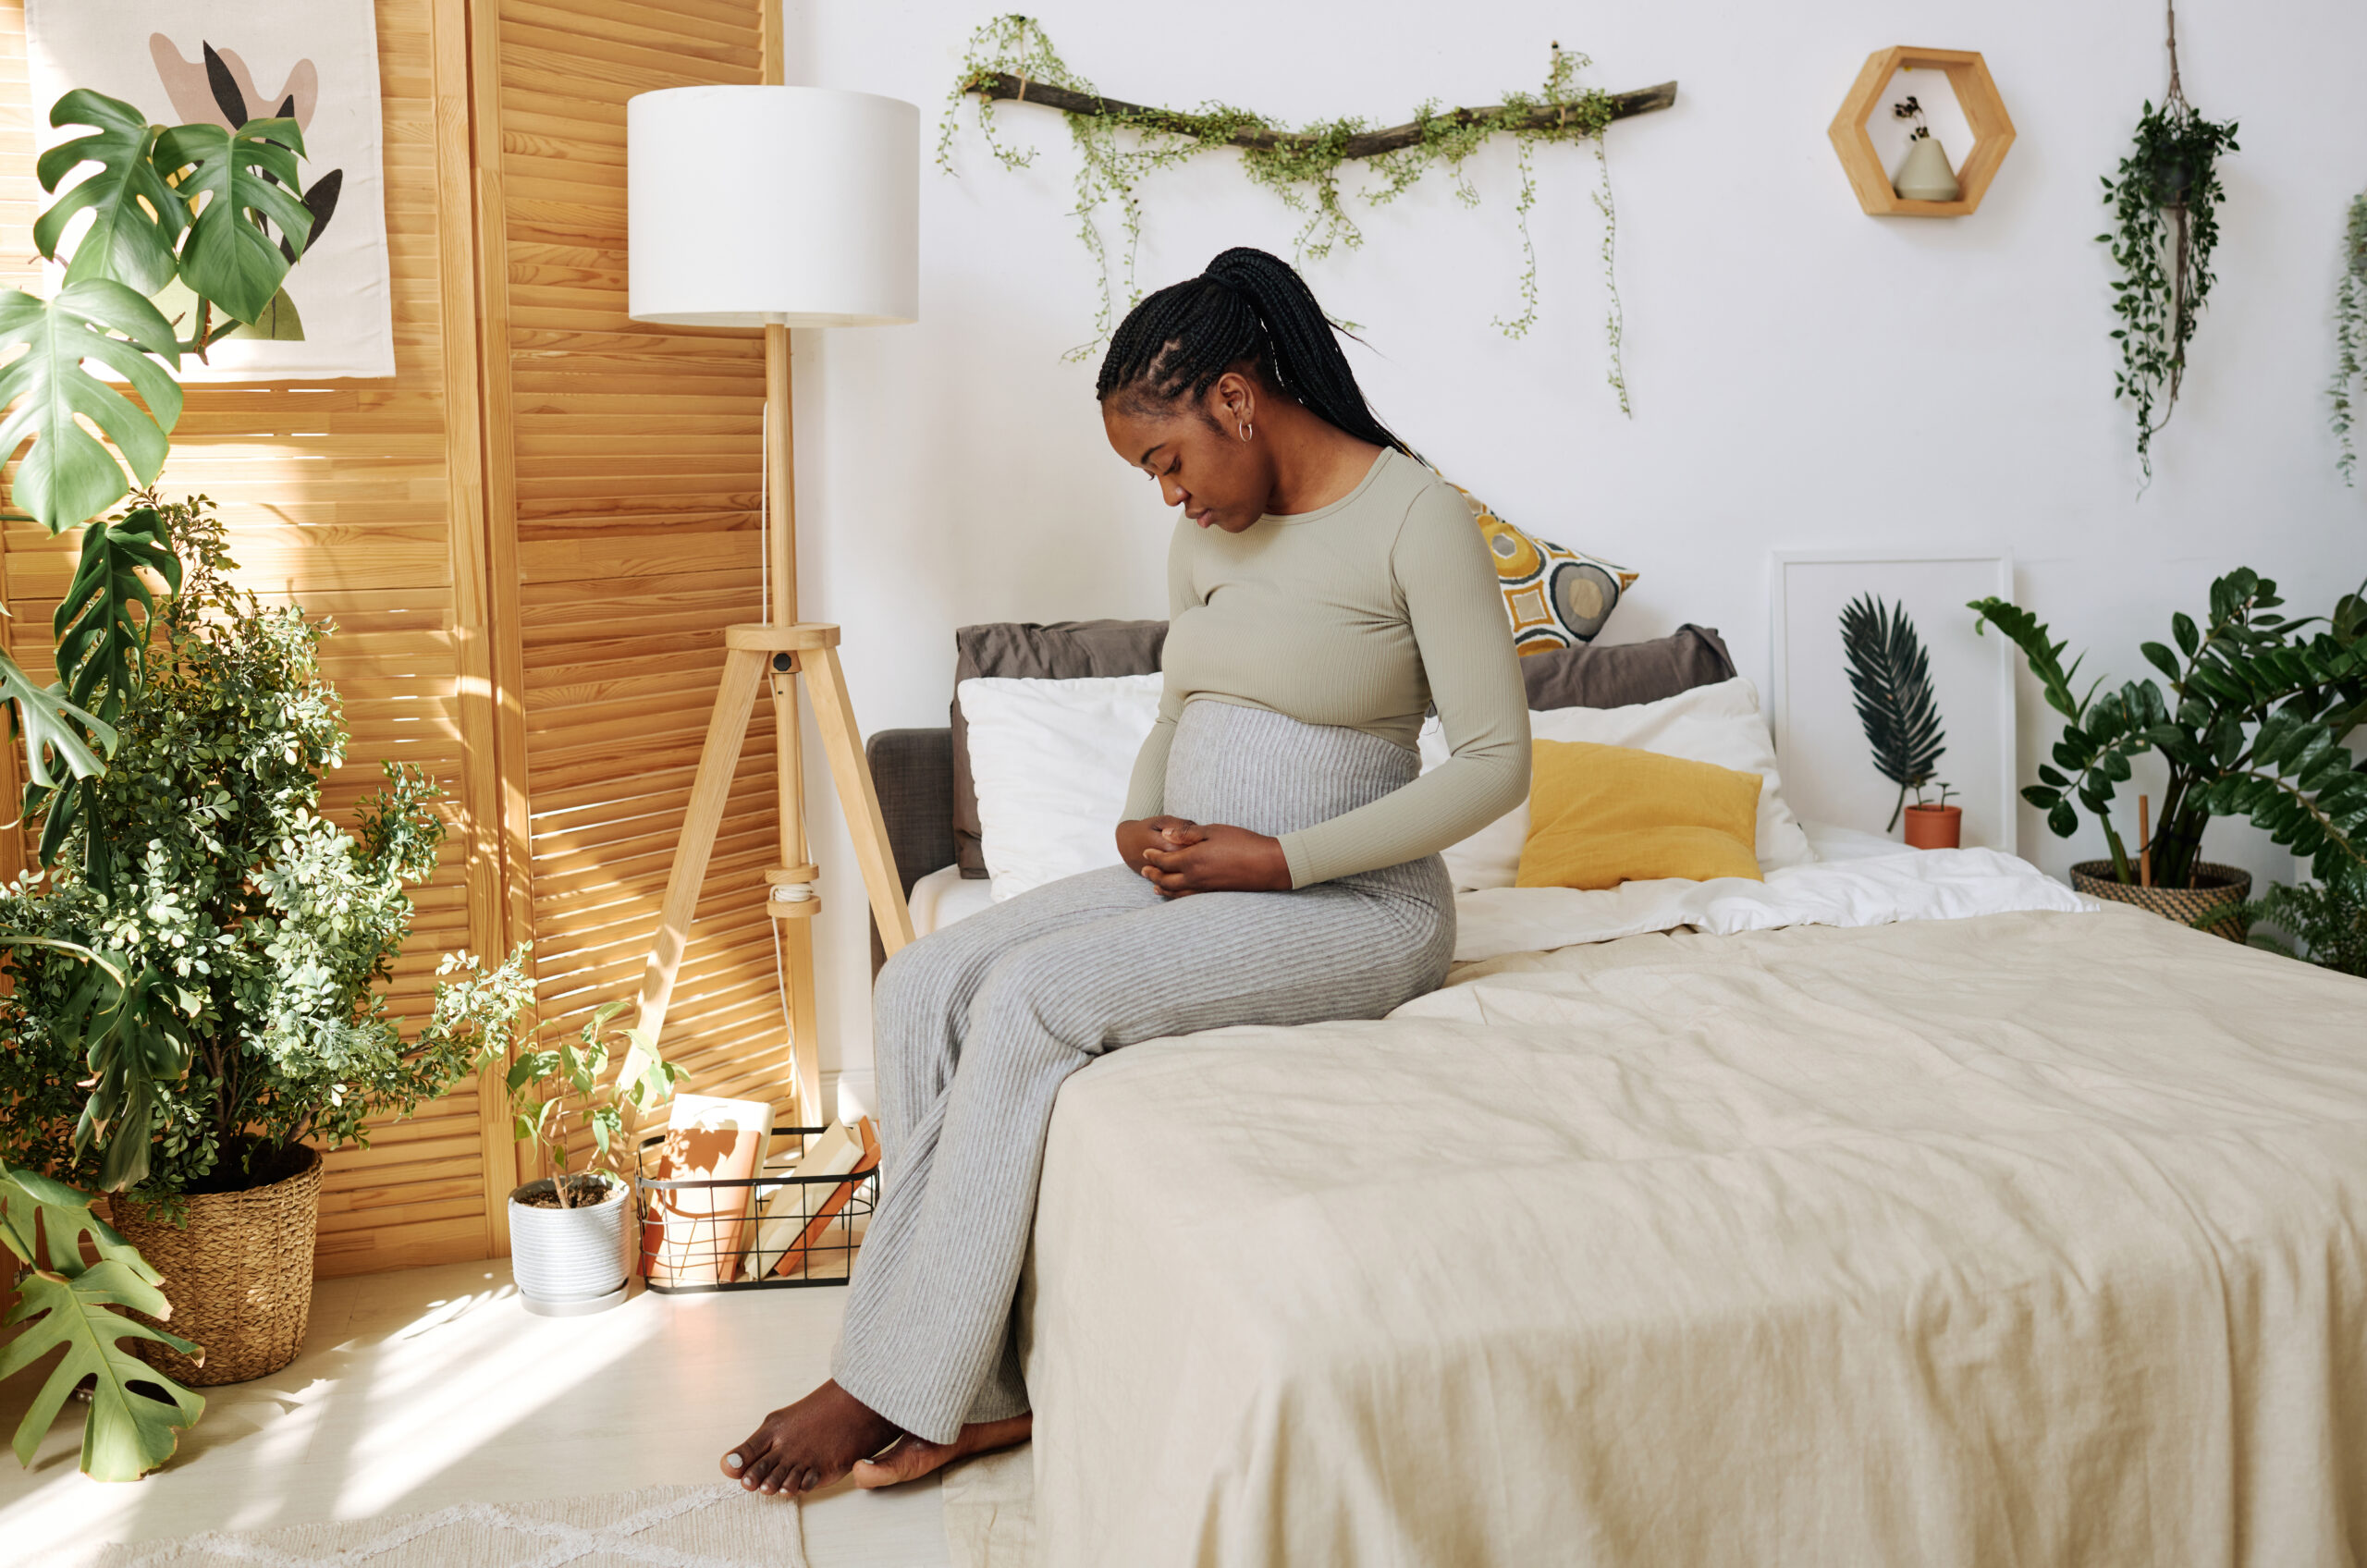 African sad woman looking at her pregnant belly while she sitting on bed in bedroom